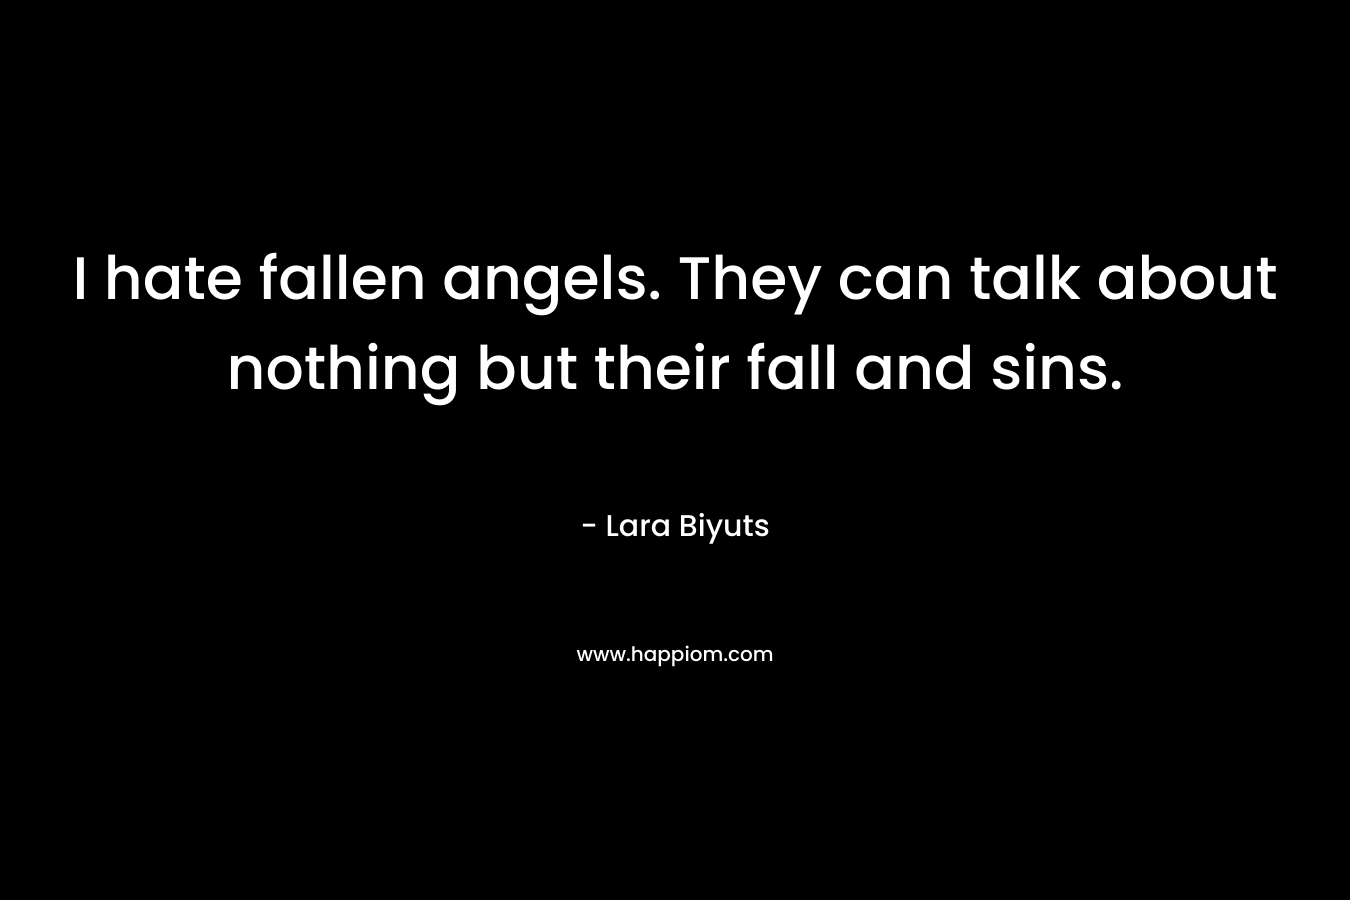 I hate fallen angels. They can talk about nothing but their fall and sins. – Lara Biyuts